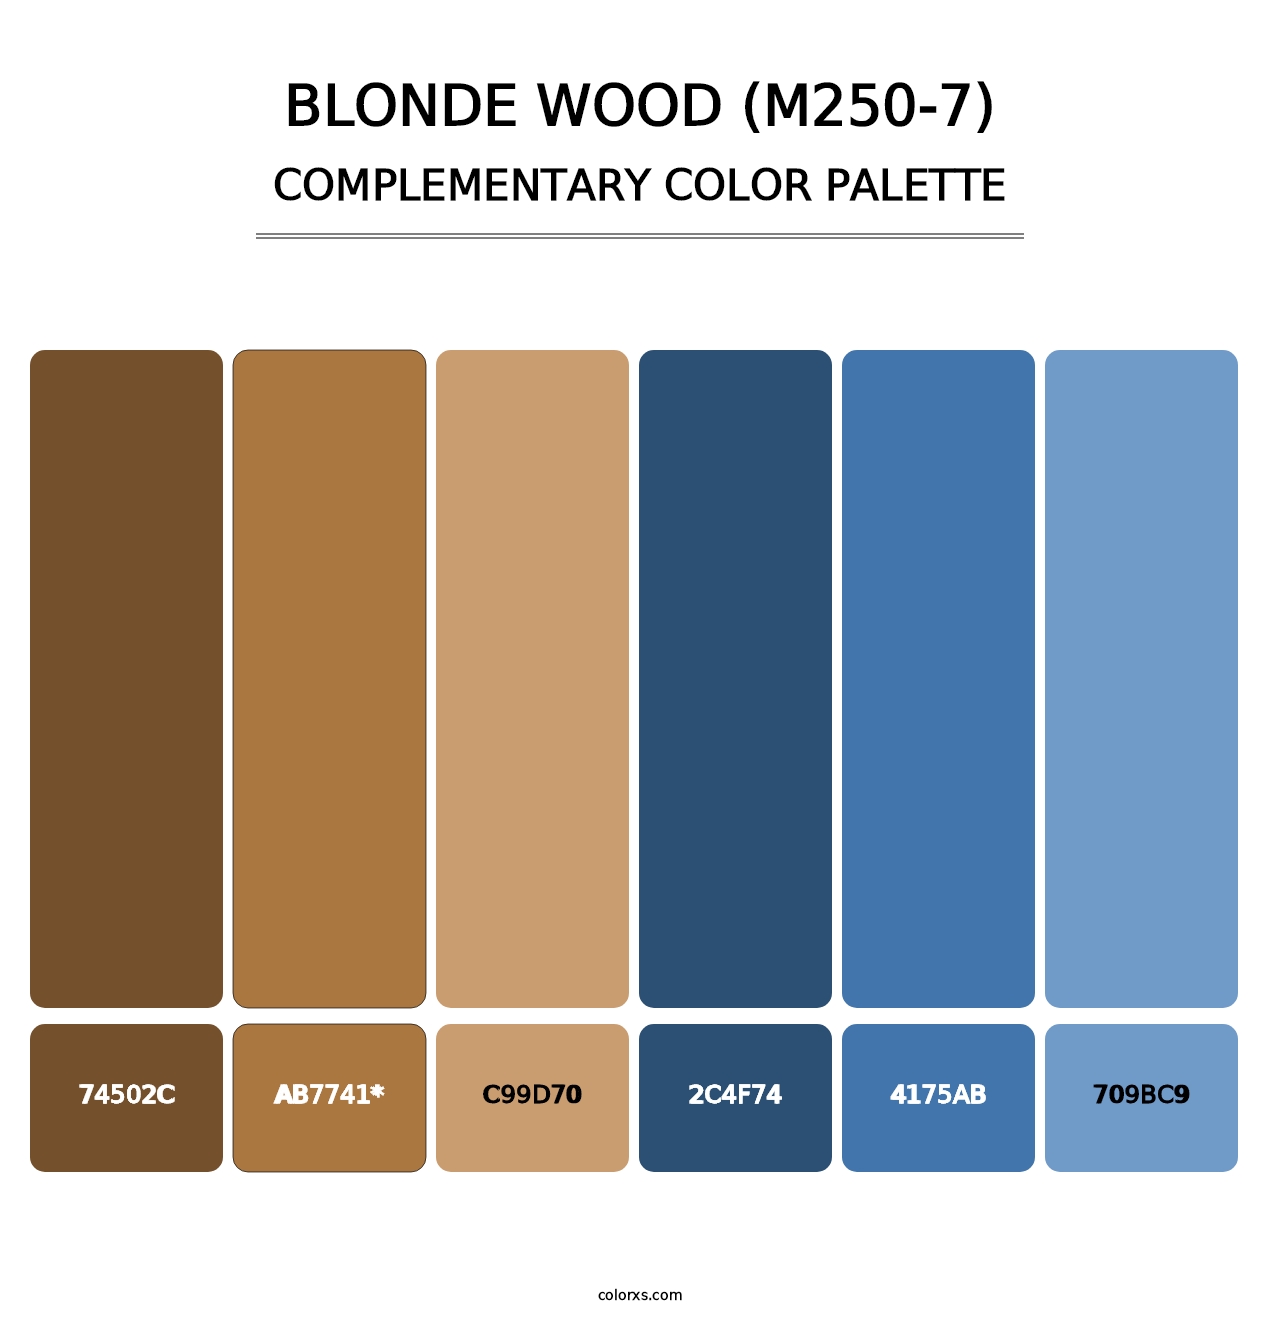 Blonde Wood (M250-7) - Complementary Color Palette